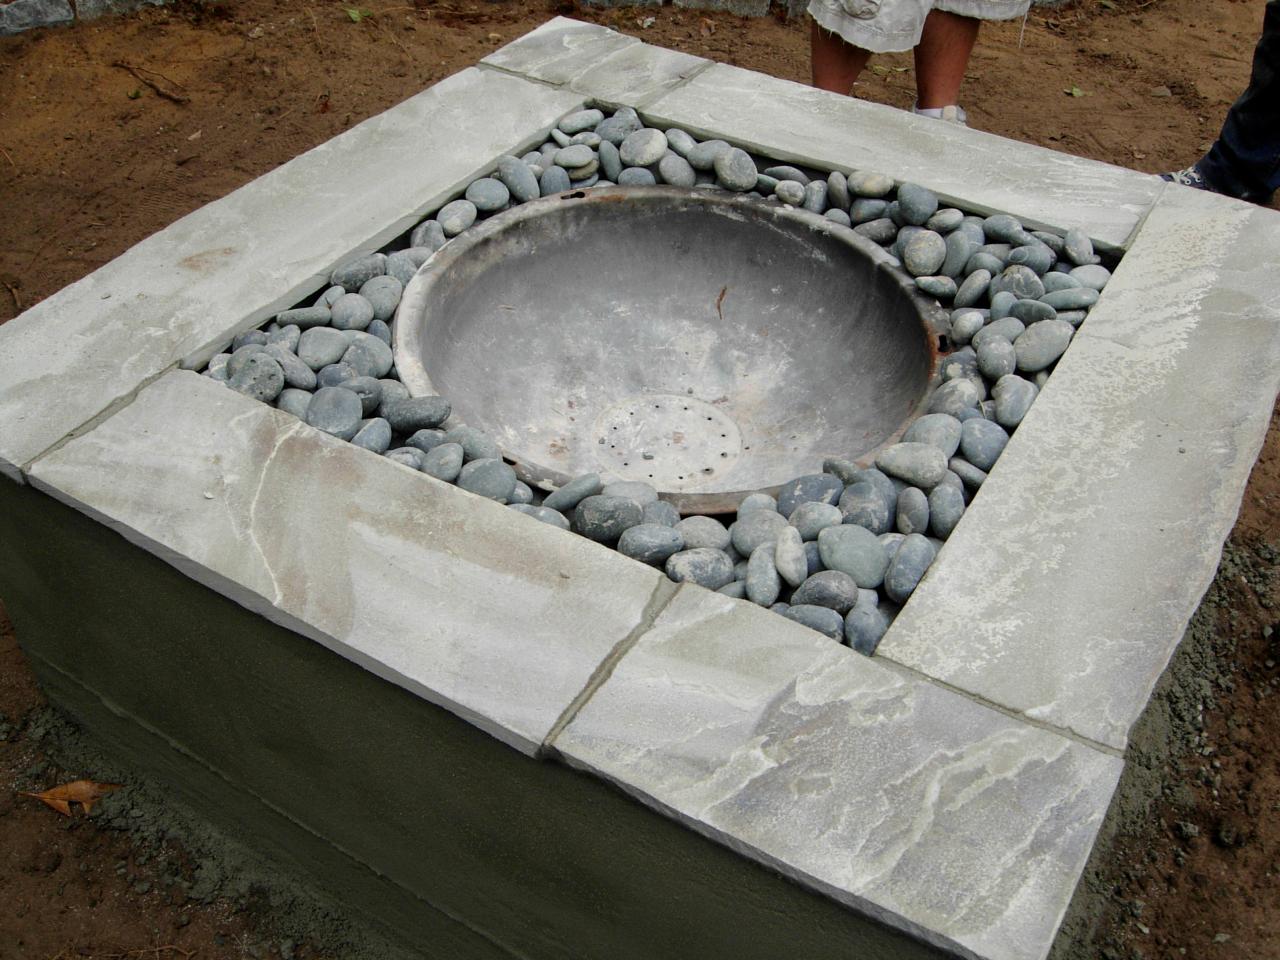 How To Make A Concrete Fire Feature, How To Make A Fire Pit On Top Of Concrete